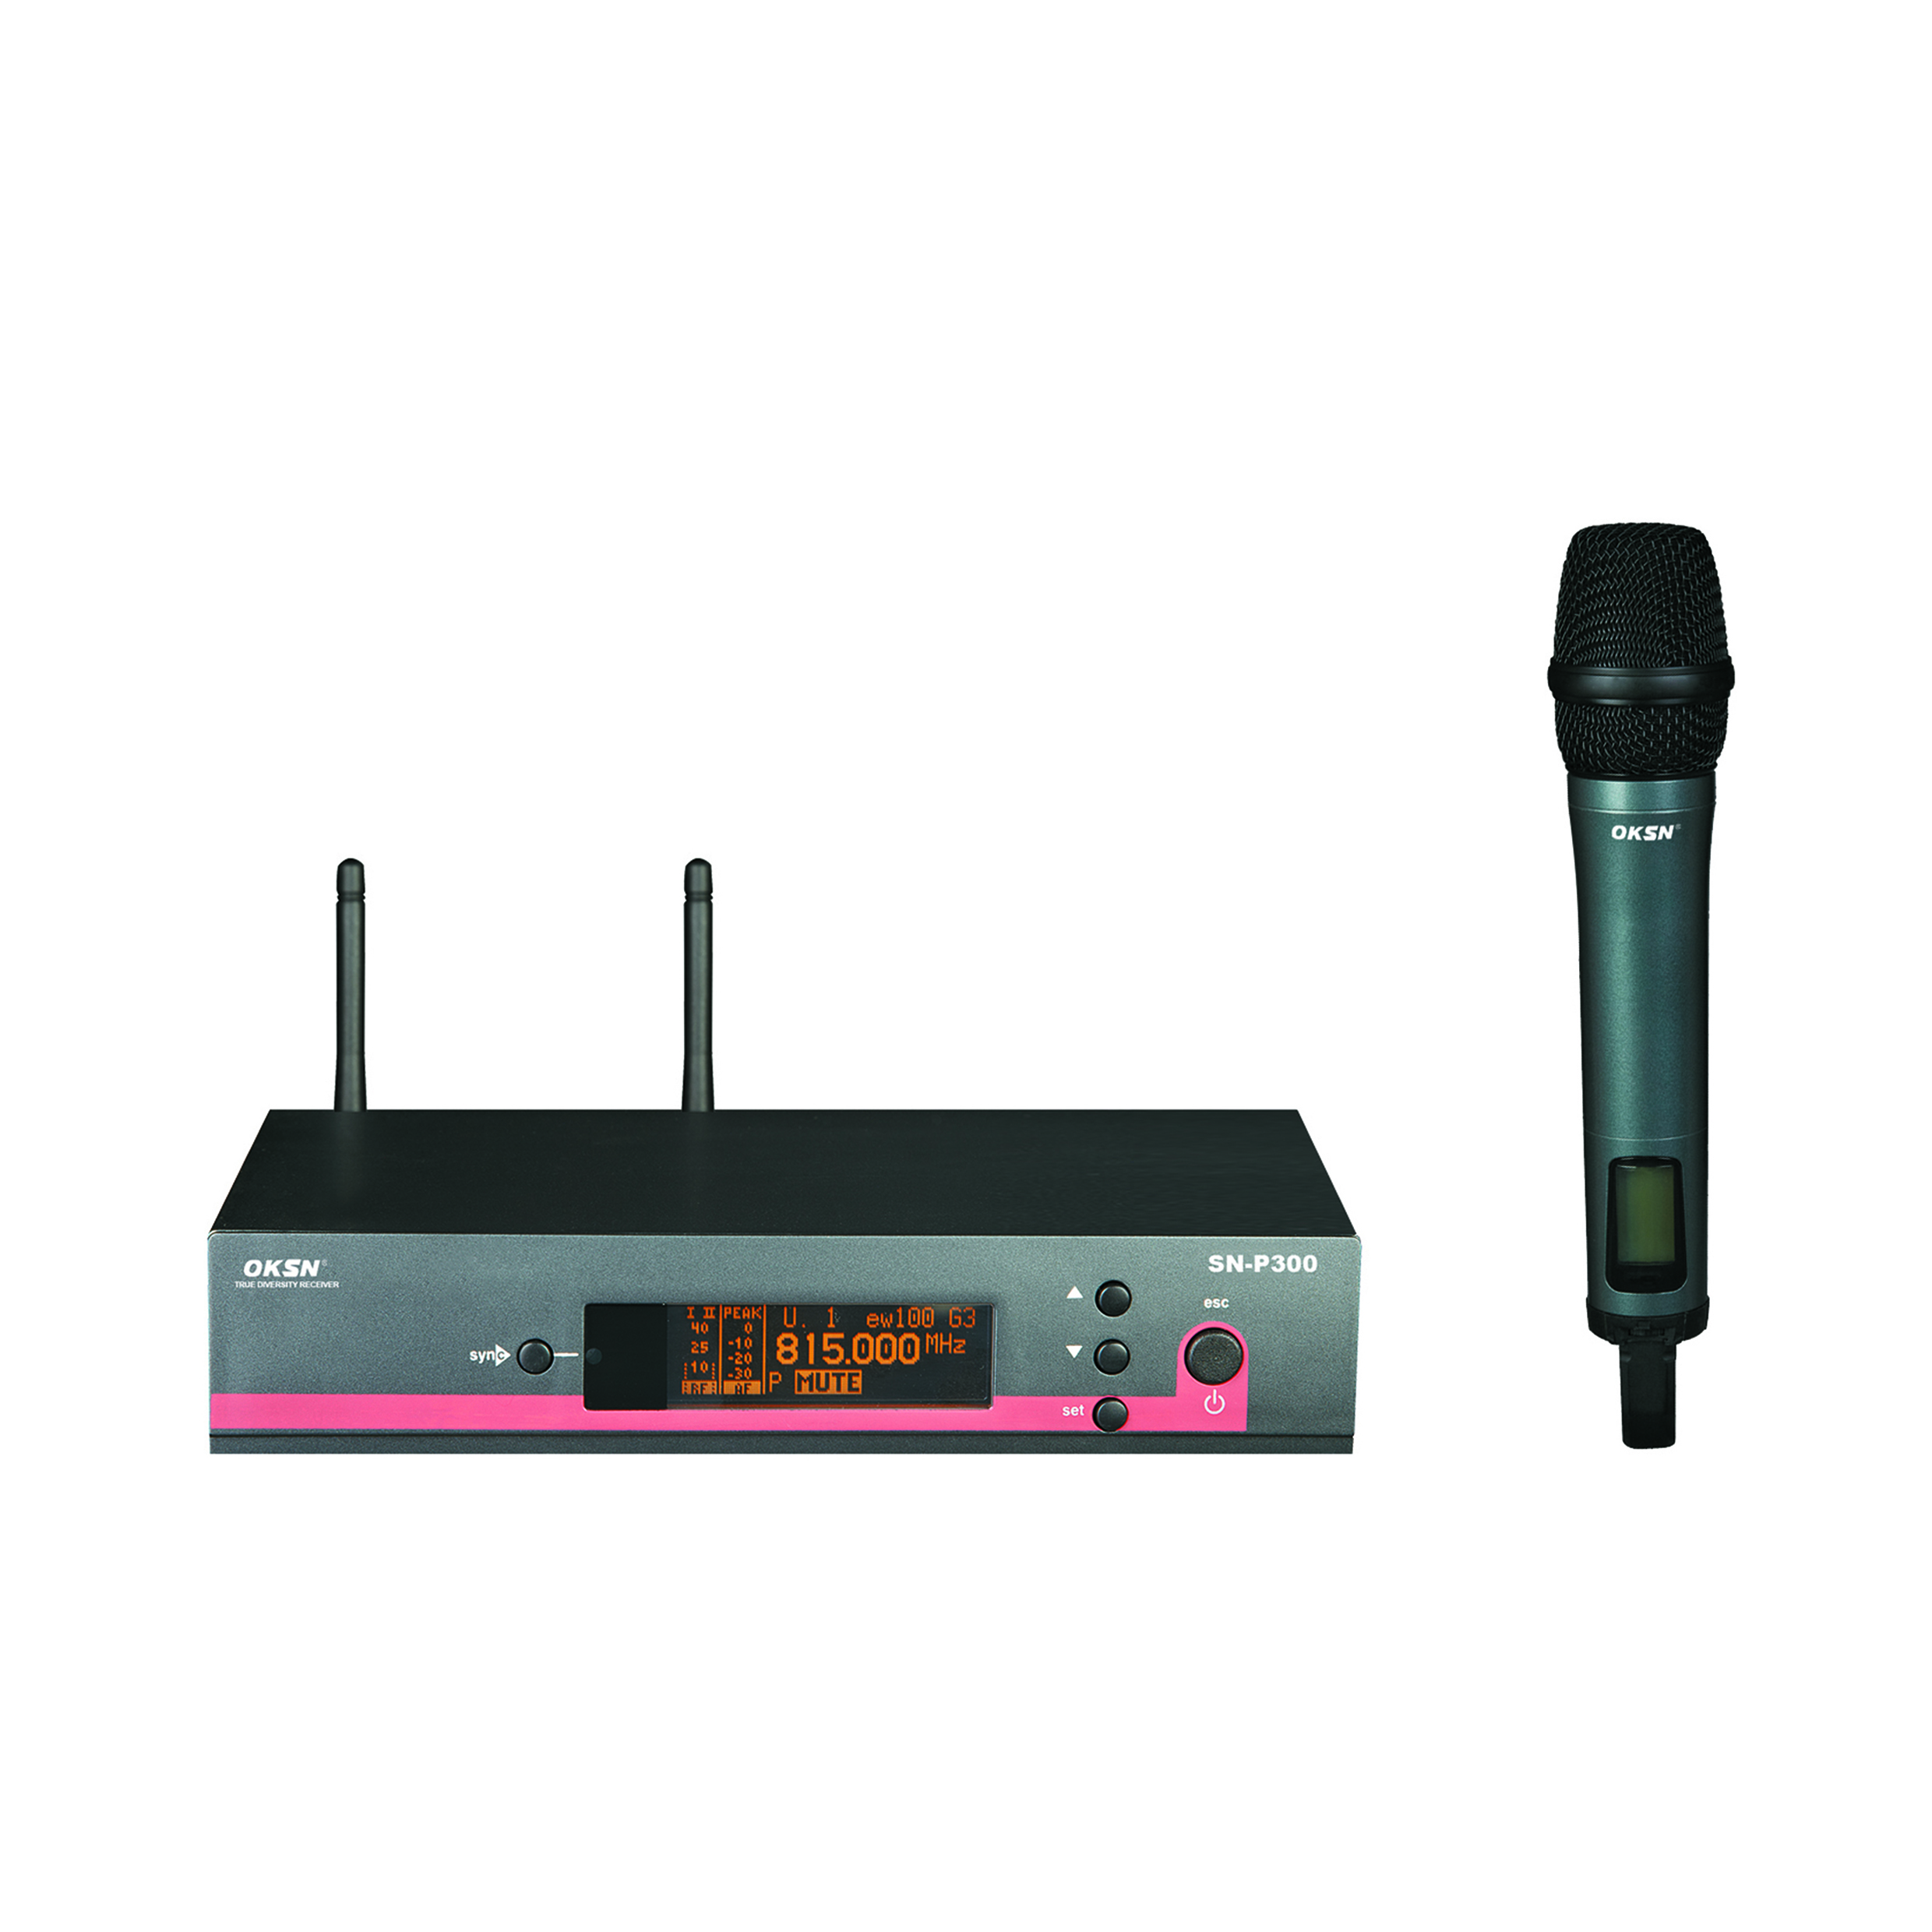 Wired Microphone Vs Wireless Microphone